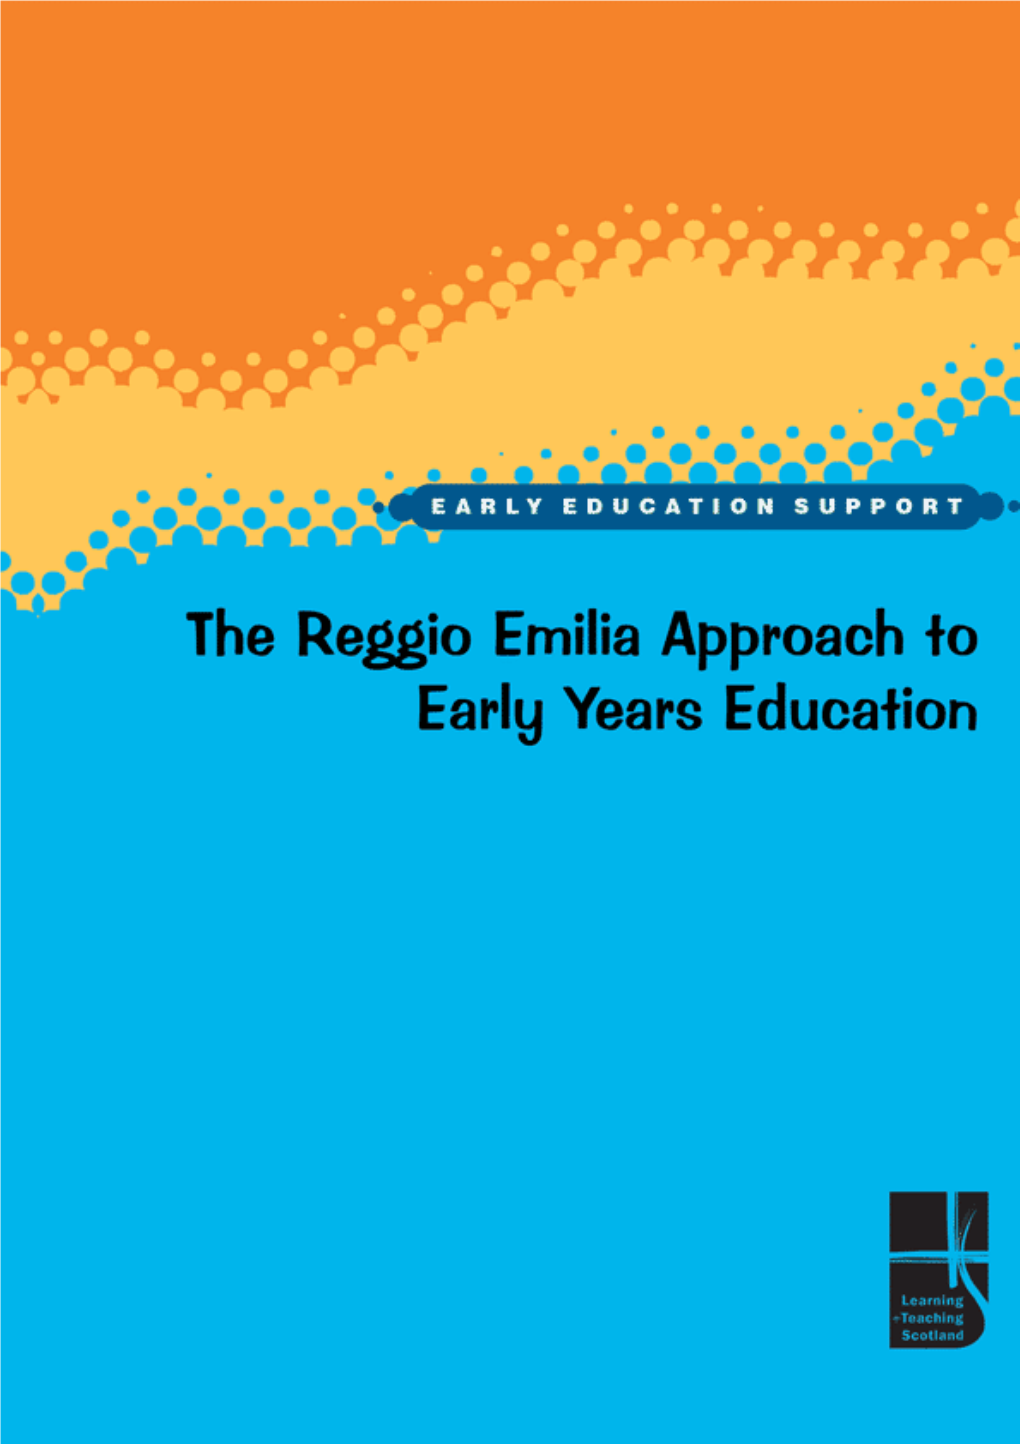 The Reggio Emilia Approach to Early Years Education